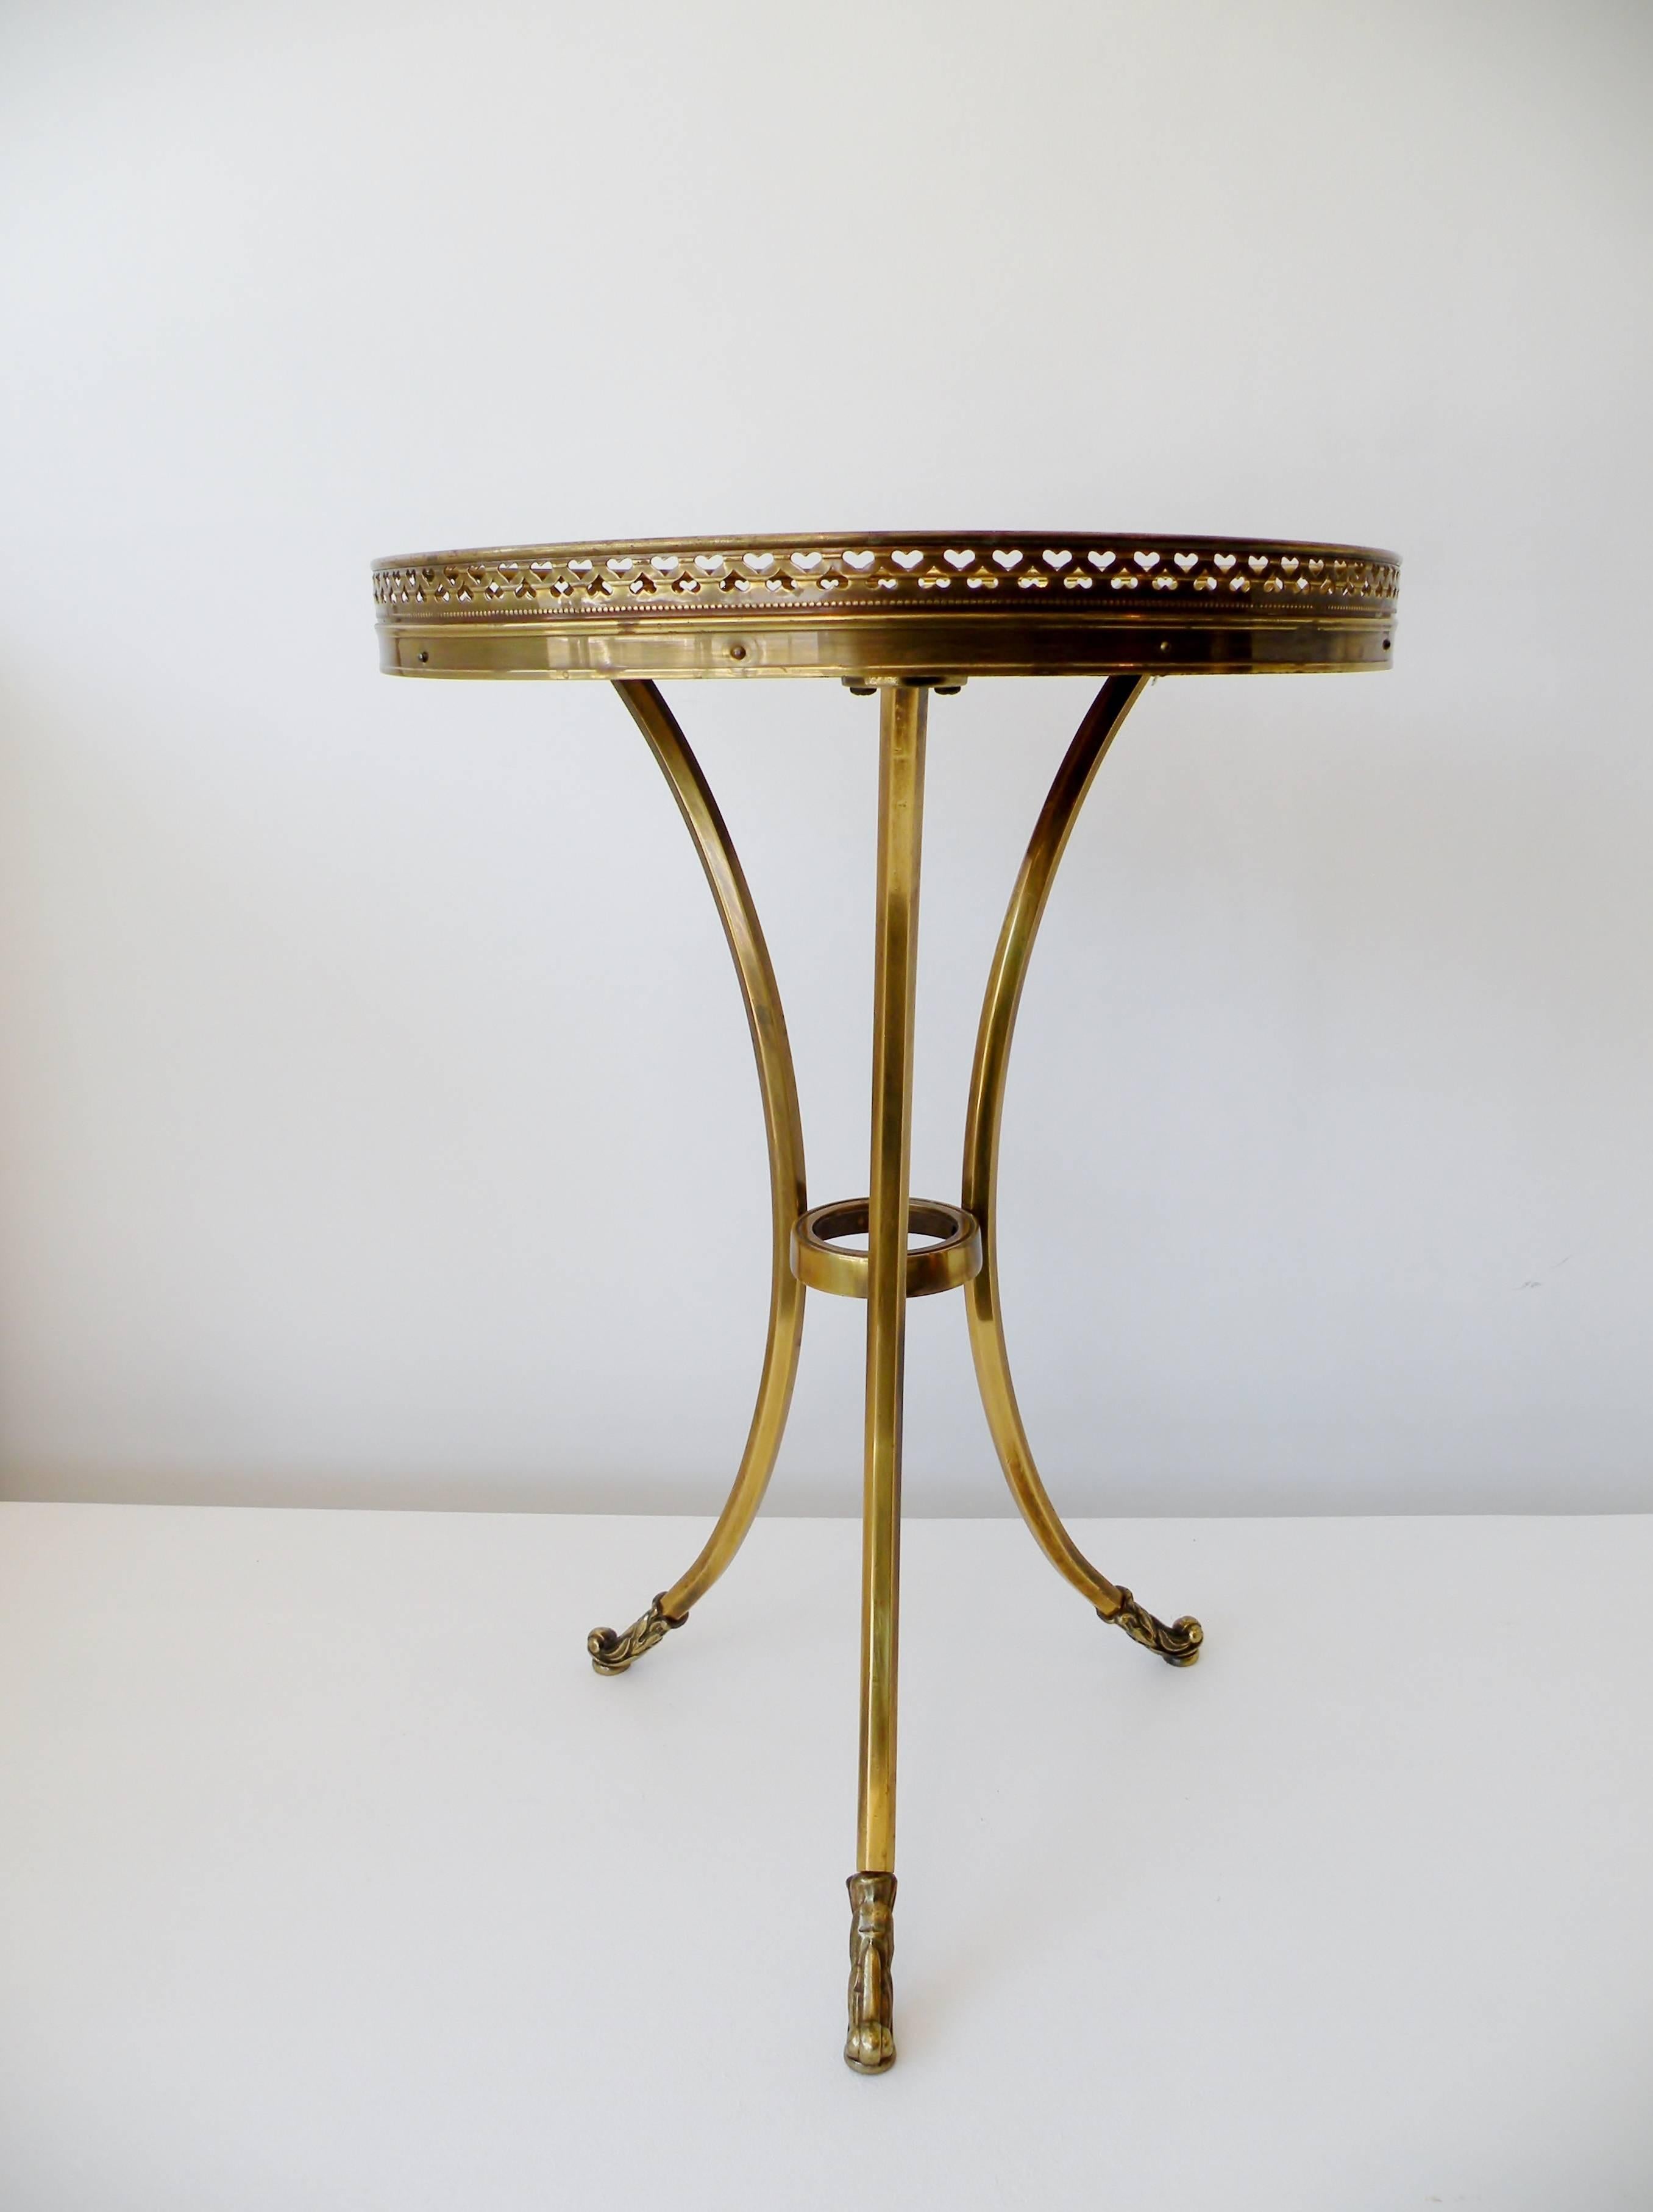 Rarely seen Mastercraft for Baker petite brass tripod cocktail side table. Elegant Classic modernist form with gallery rim pierced with alternating hearts and stylized acanthus leaf feet. Manufacturer item stock number stenciled to underside.